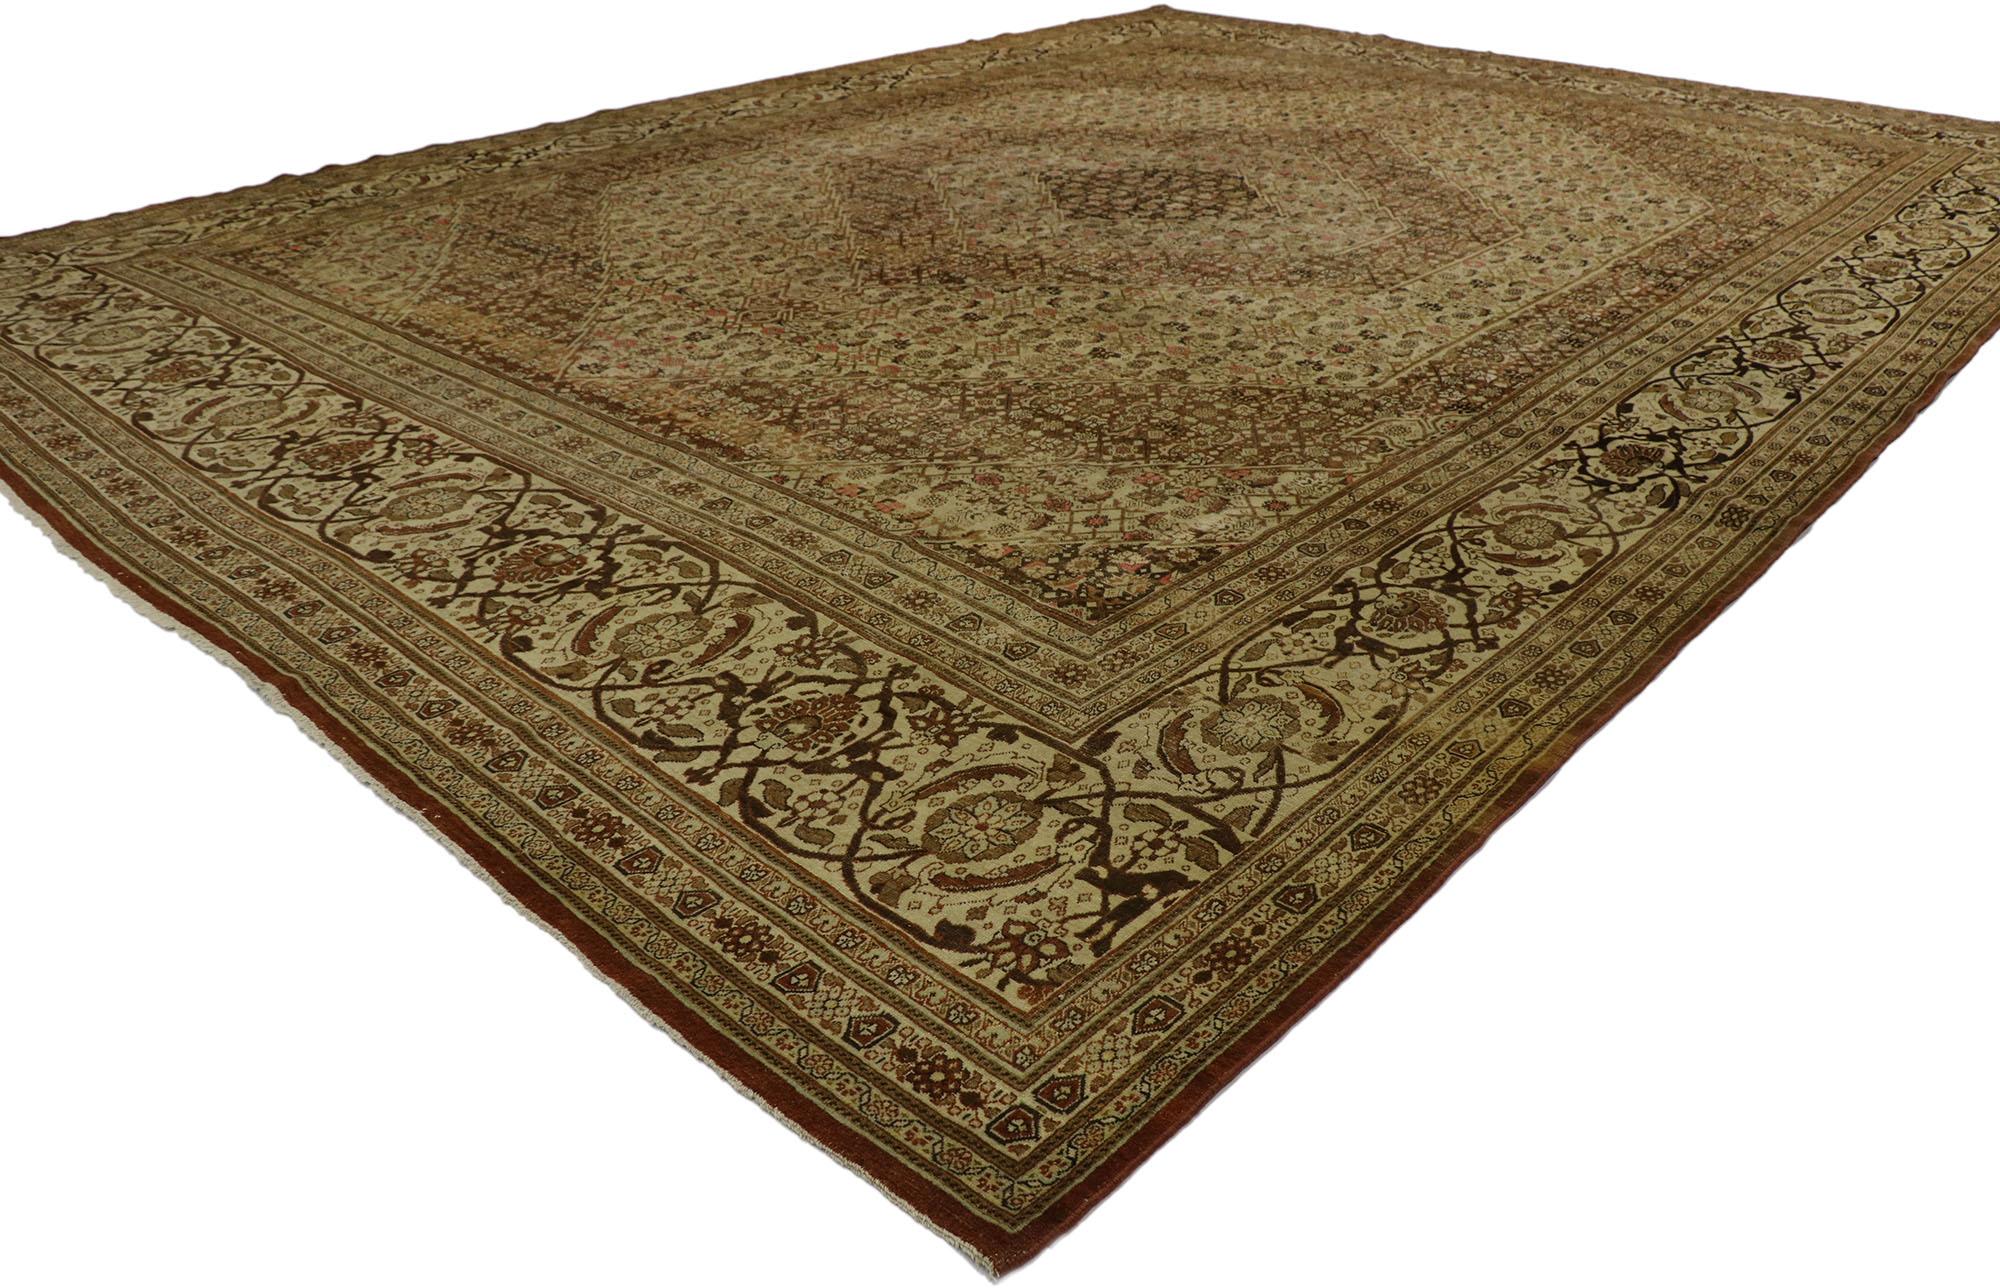 53173 antique Persian Mahi Tabriz rug with Modern Shaker style. 
Rustic sensibility meets earth-tone elegance in this hand knotted wool antique Persian Tabriz rug. The antique washed field features a hexagonal concentric medallion patterned with an